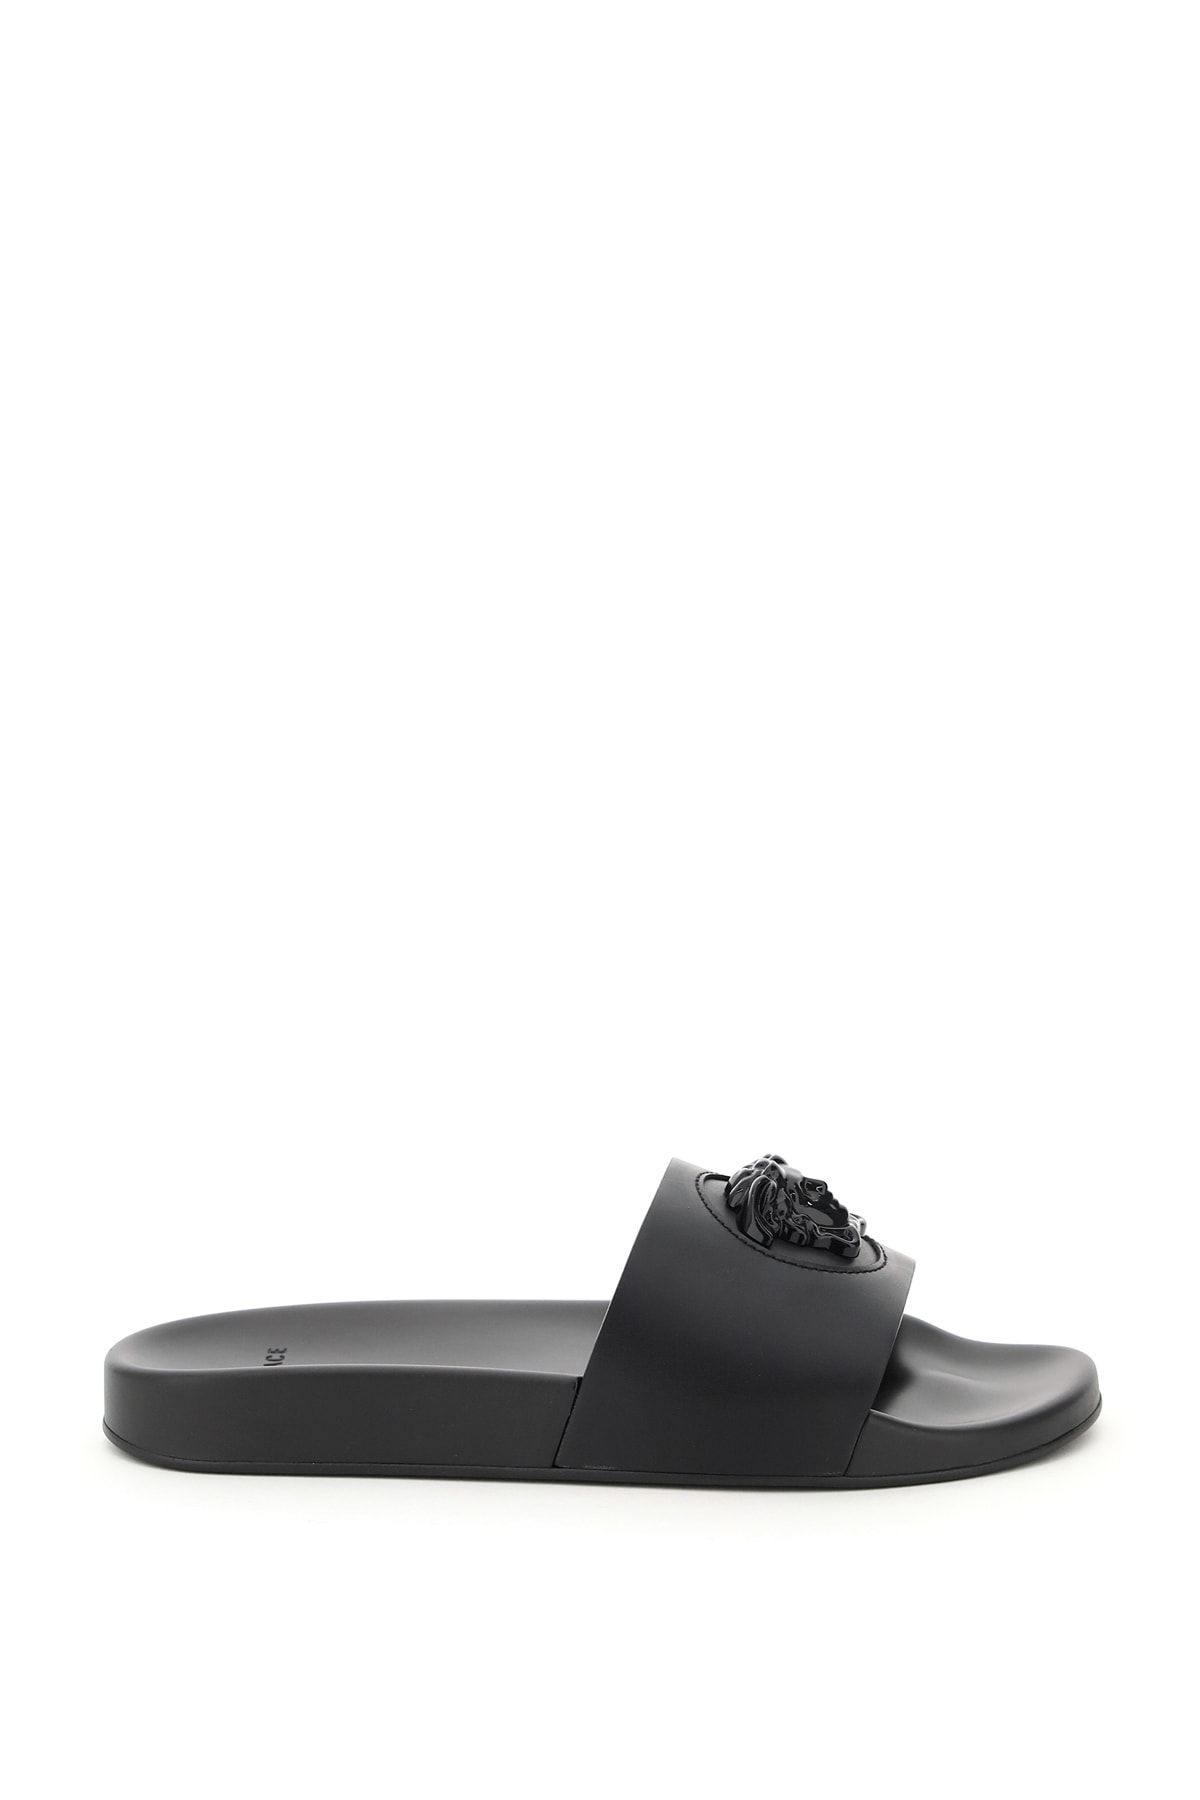 Buy Versace Medusa Rubber Slides online, shop Versace shoes with free shipping